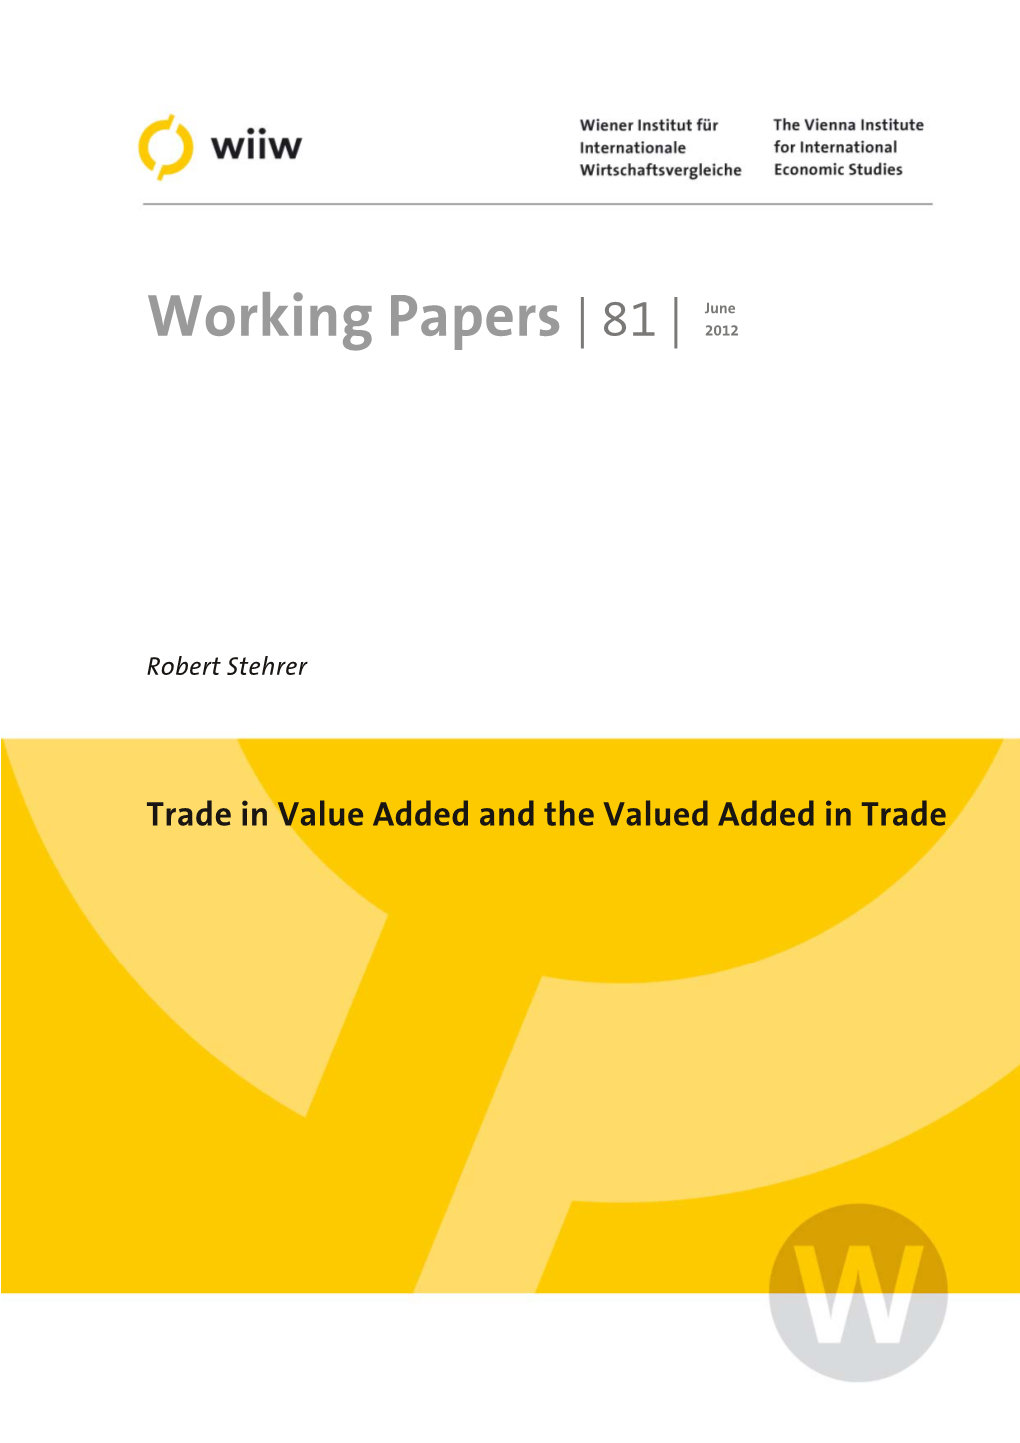 Wiiw Working Paper 81: Trade in Value Added and the Valued